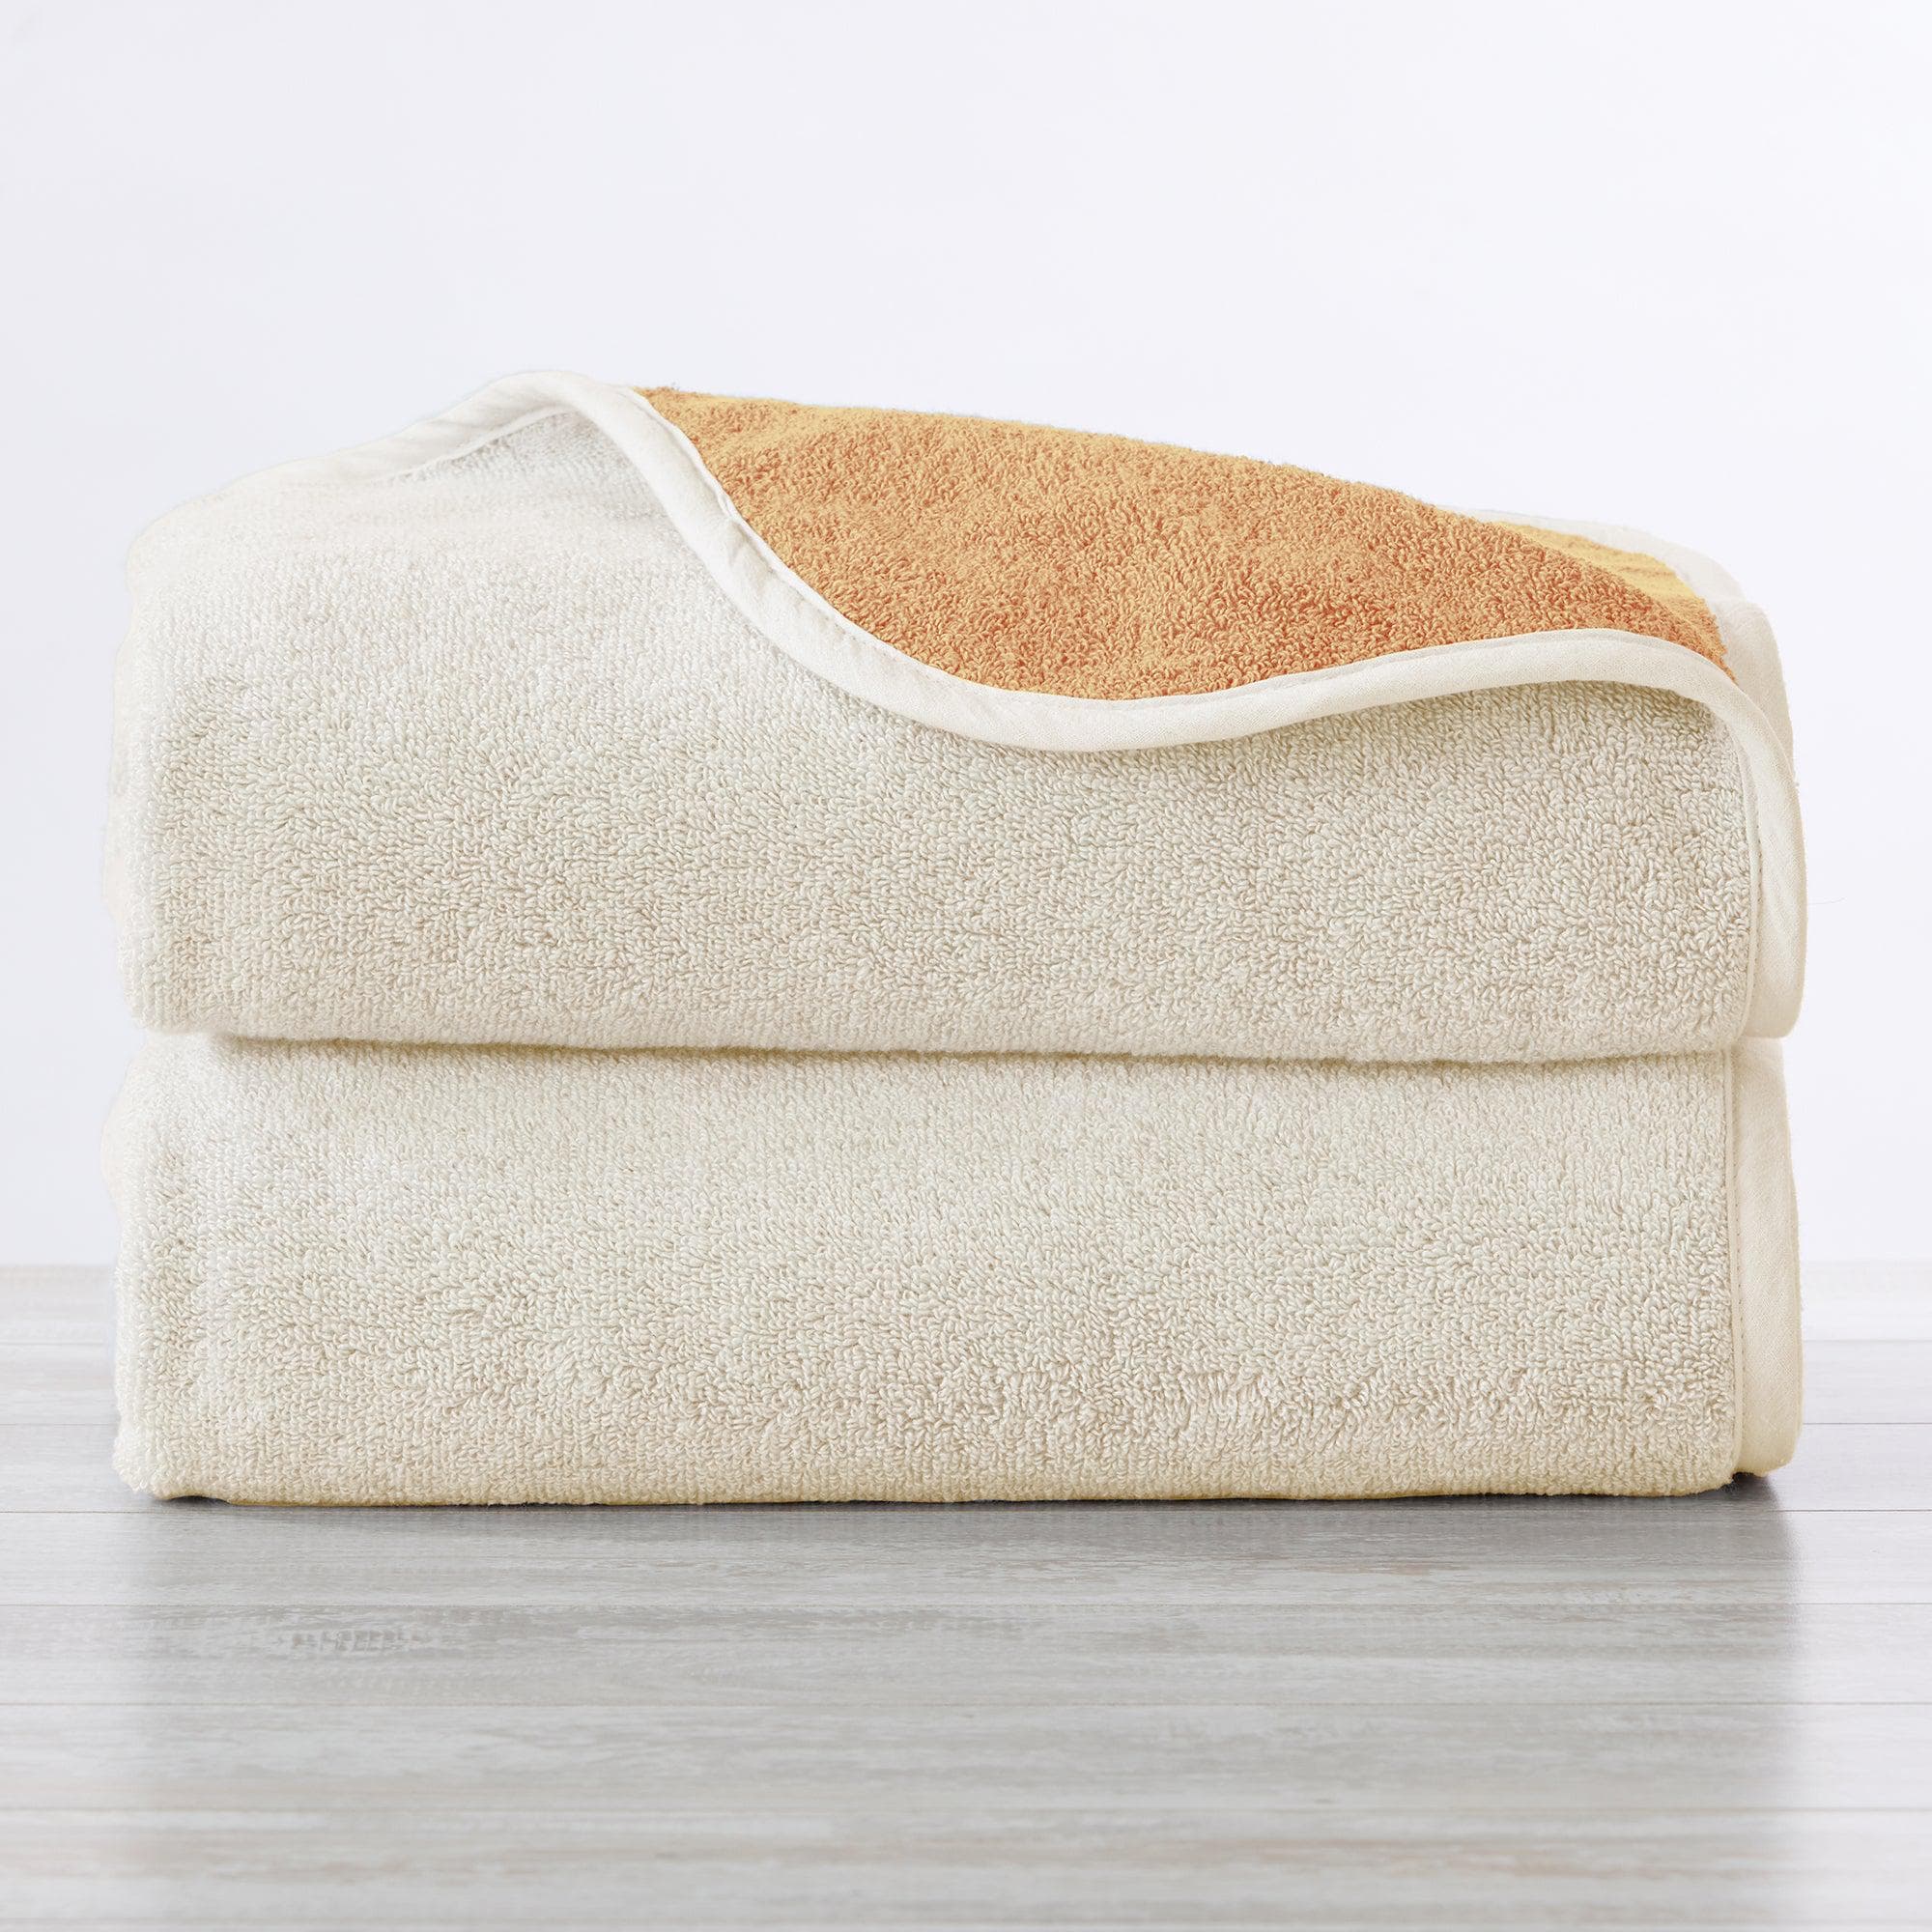 2 Pack Oversized Bath Towels Super Absortbent Beach Towel - On Sale - Bed  Bath & Beyond - 34131905